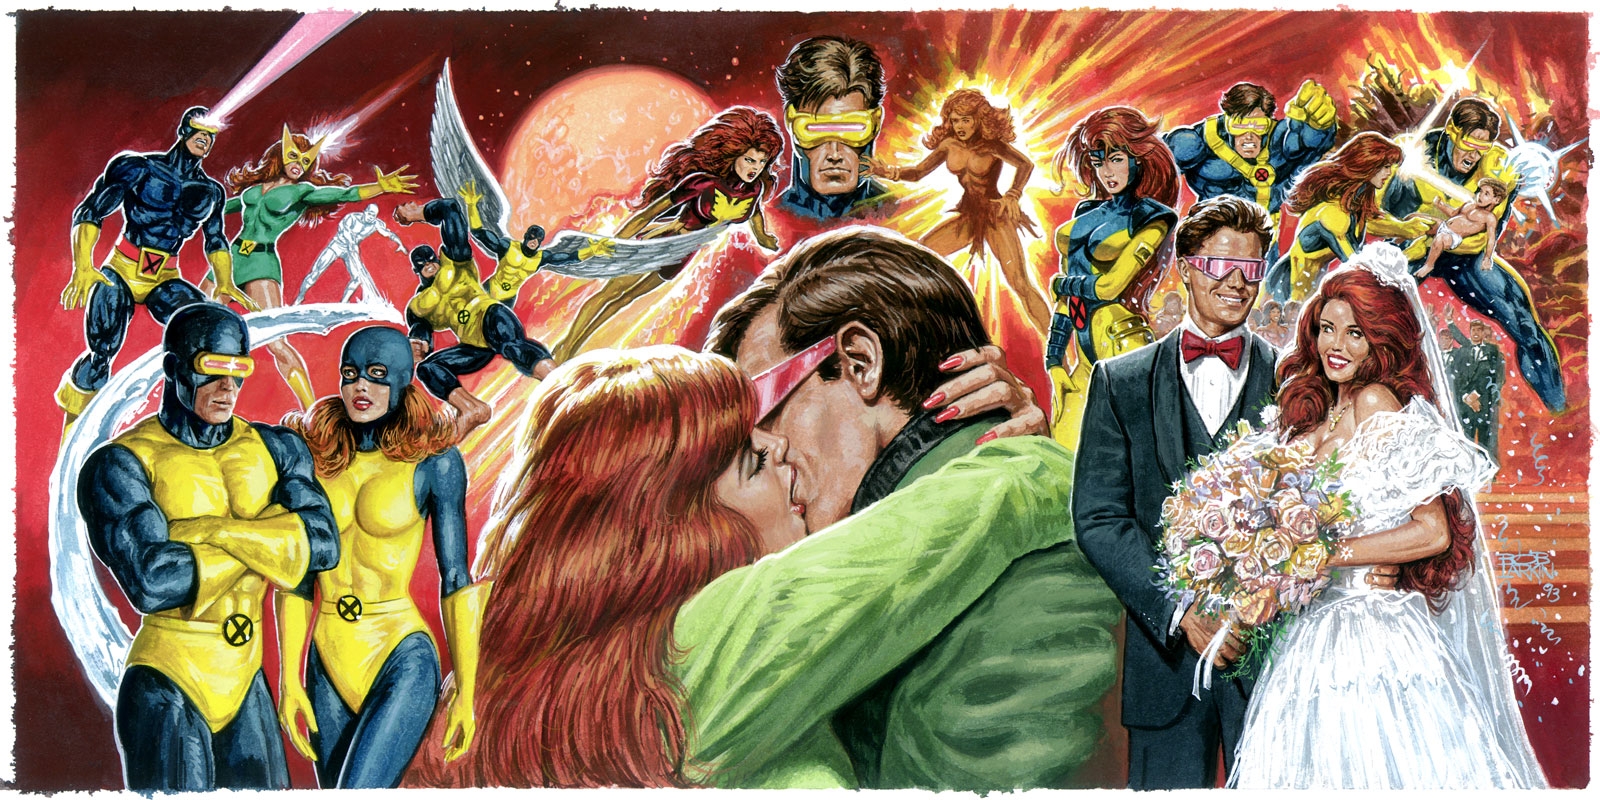 The Wedding of Jean Grey and Scott Summers in Marvel's June Solicitations